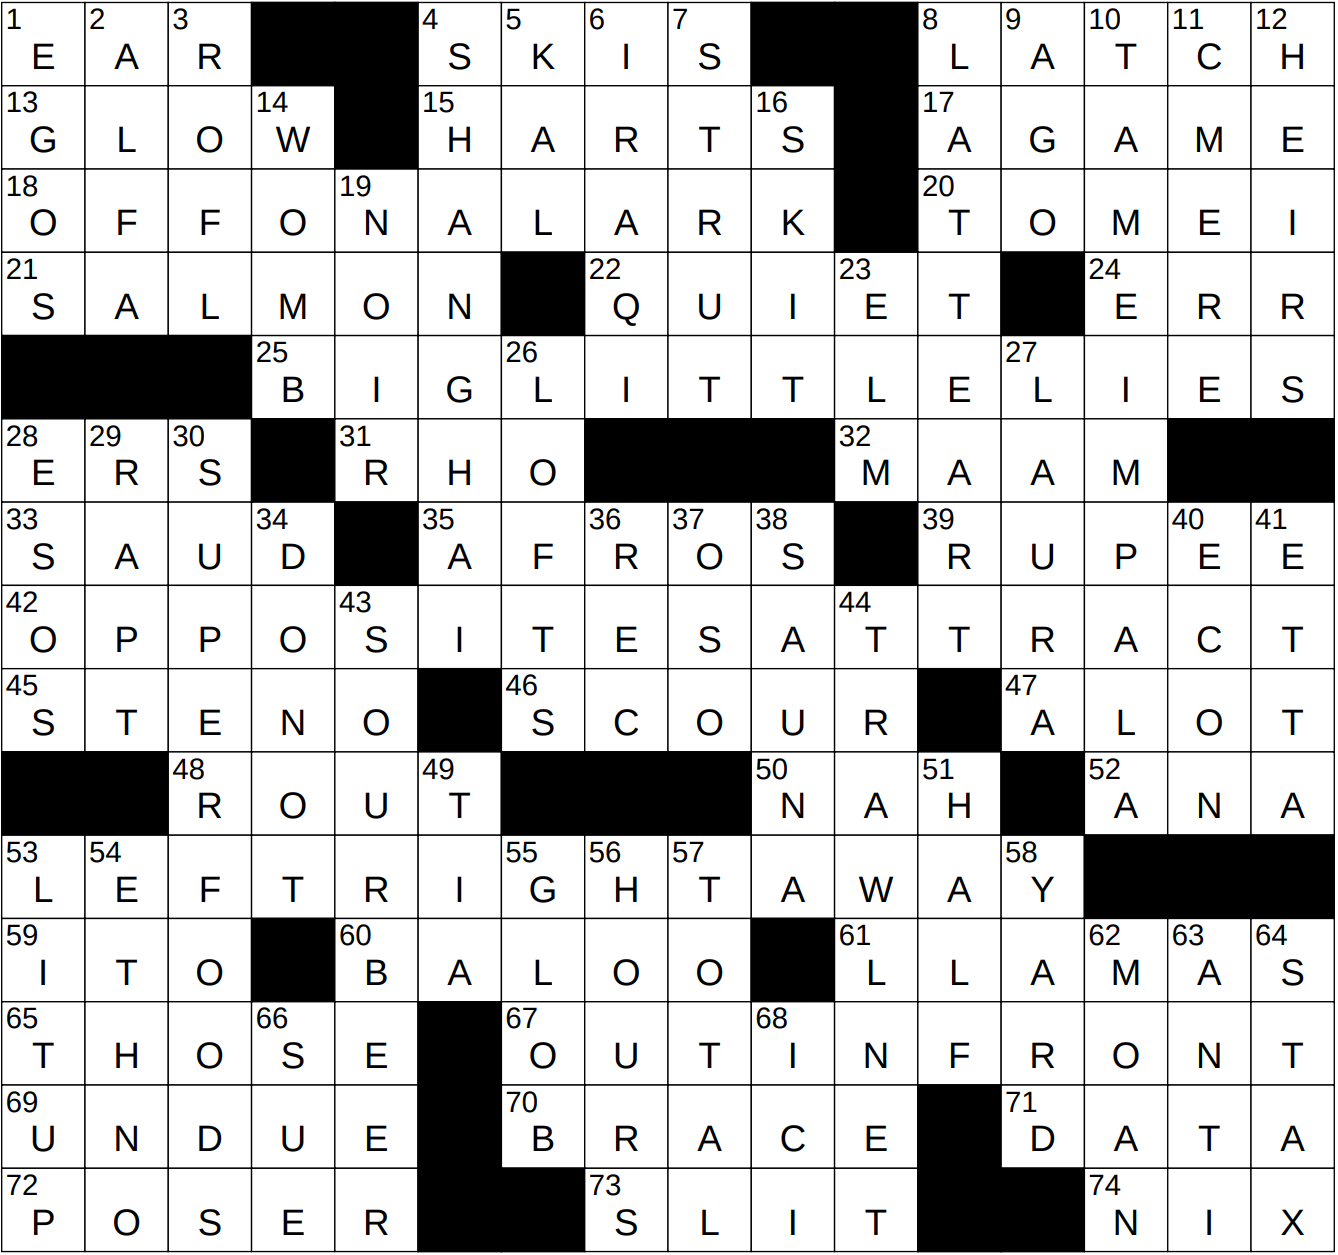  - Page 2 of 5151 - Answers to the New York Times Crossword